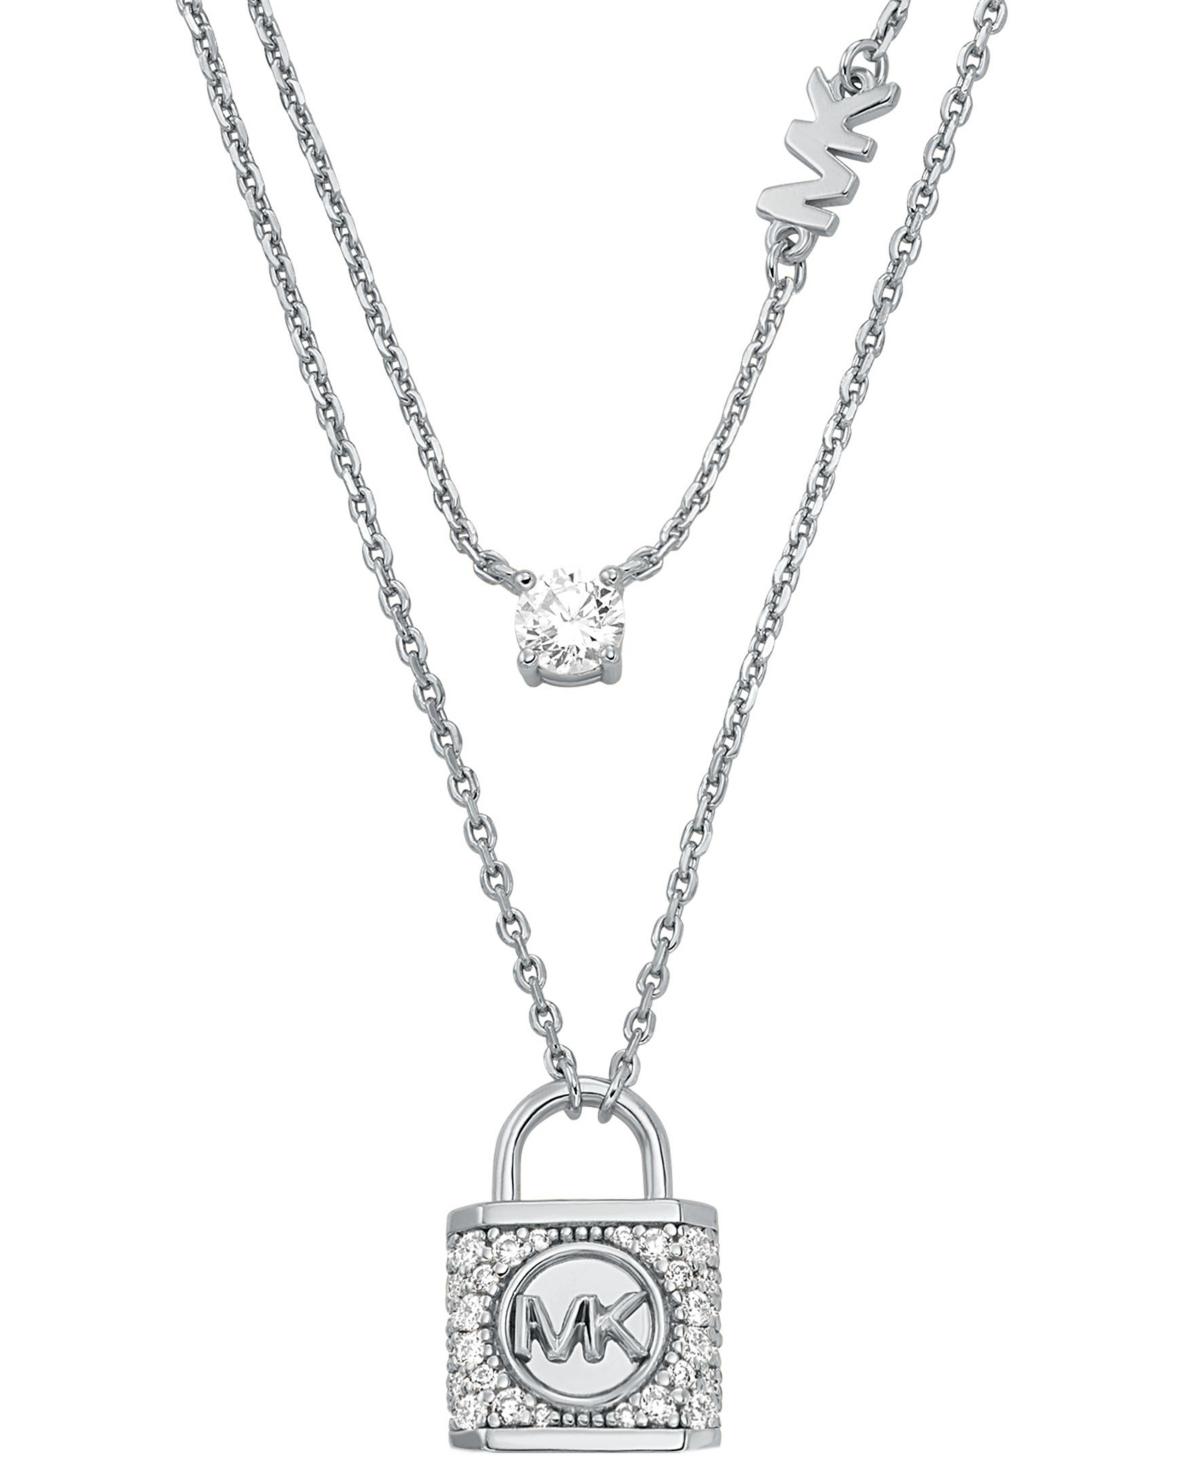 Michael Kors BRILLIANCE | Gold Plated Sterling Silver Necklace MKC1573AN710  - First Class Watches™ USA